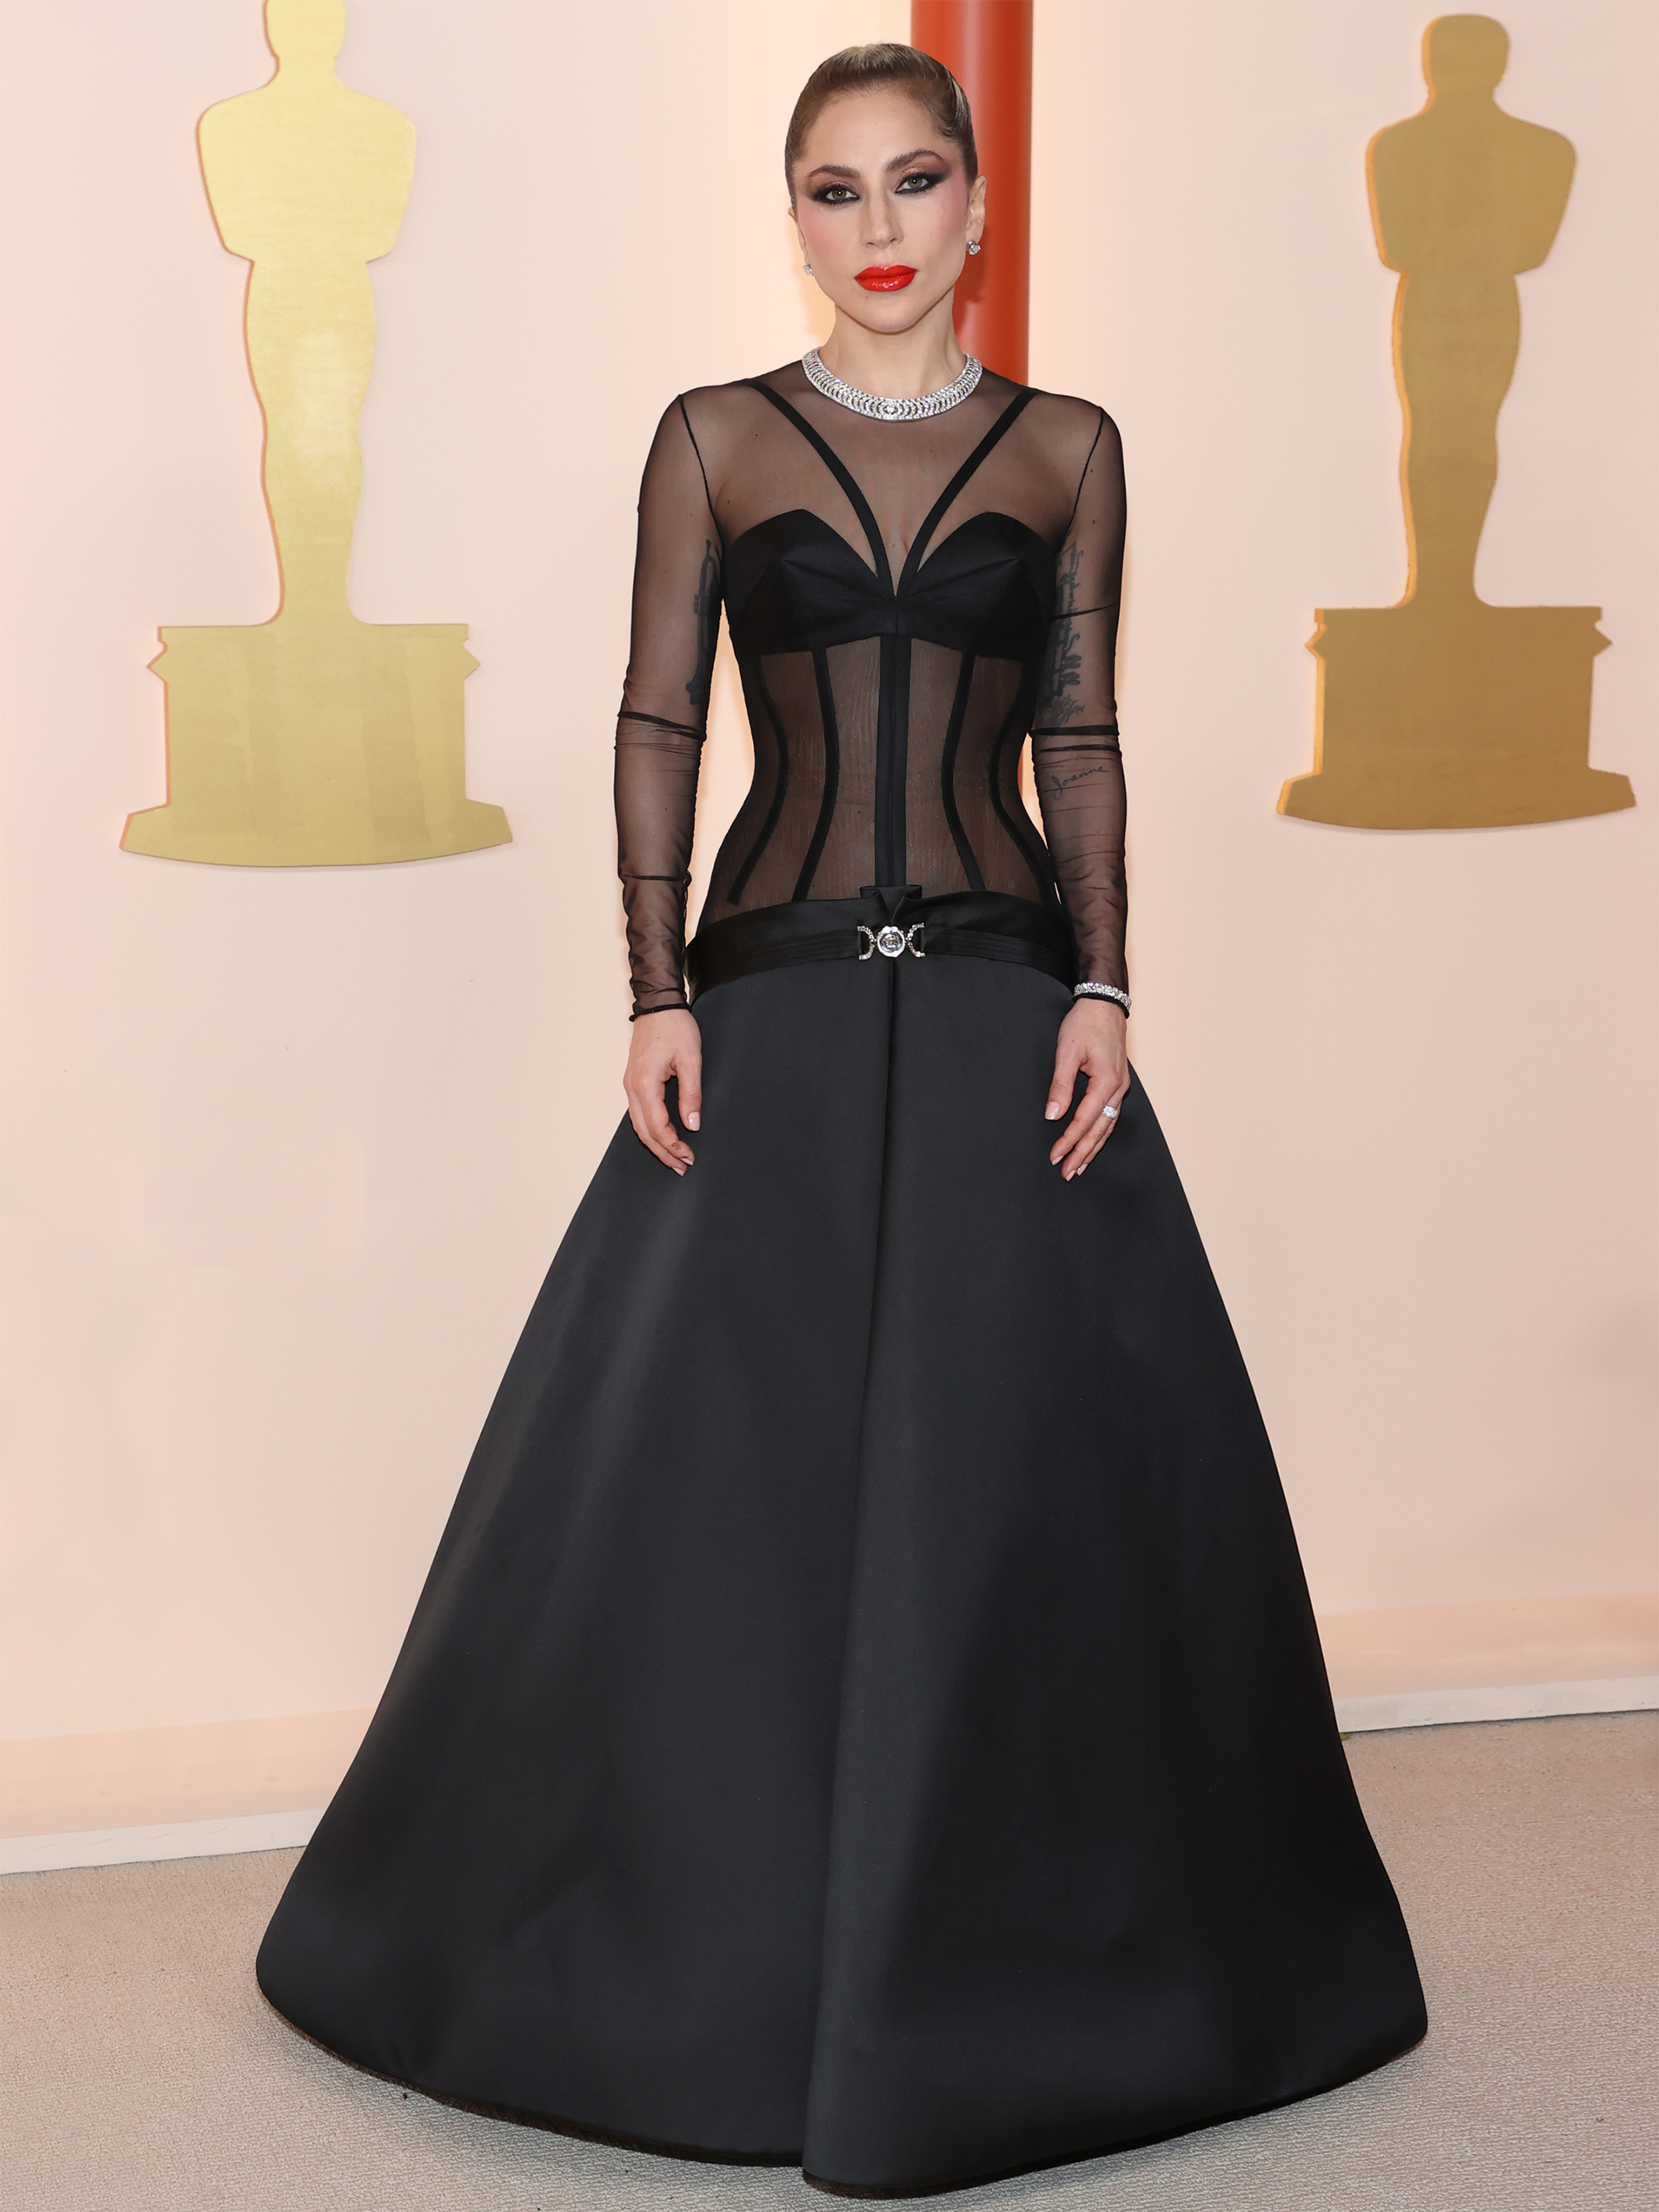 Oscars 2023: The Best Dressed Stars At The 95th Academy Awards